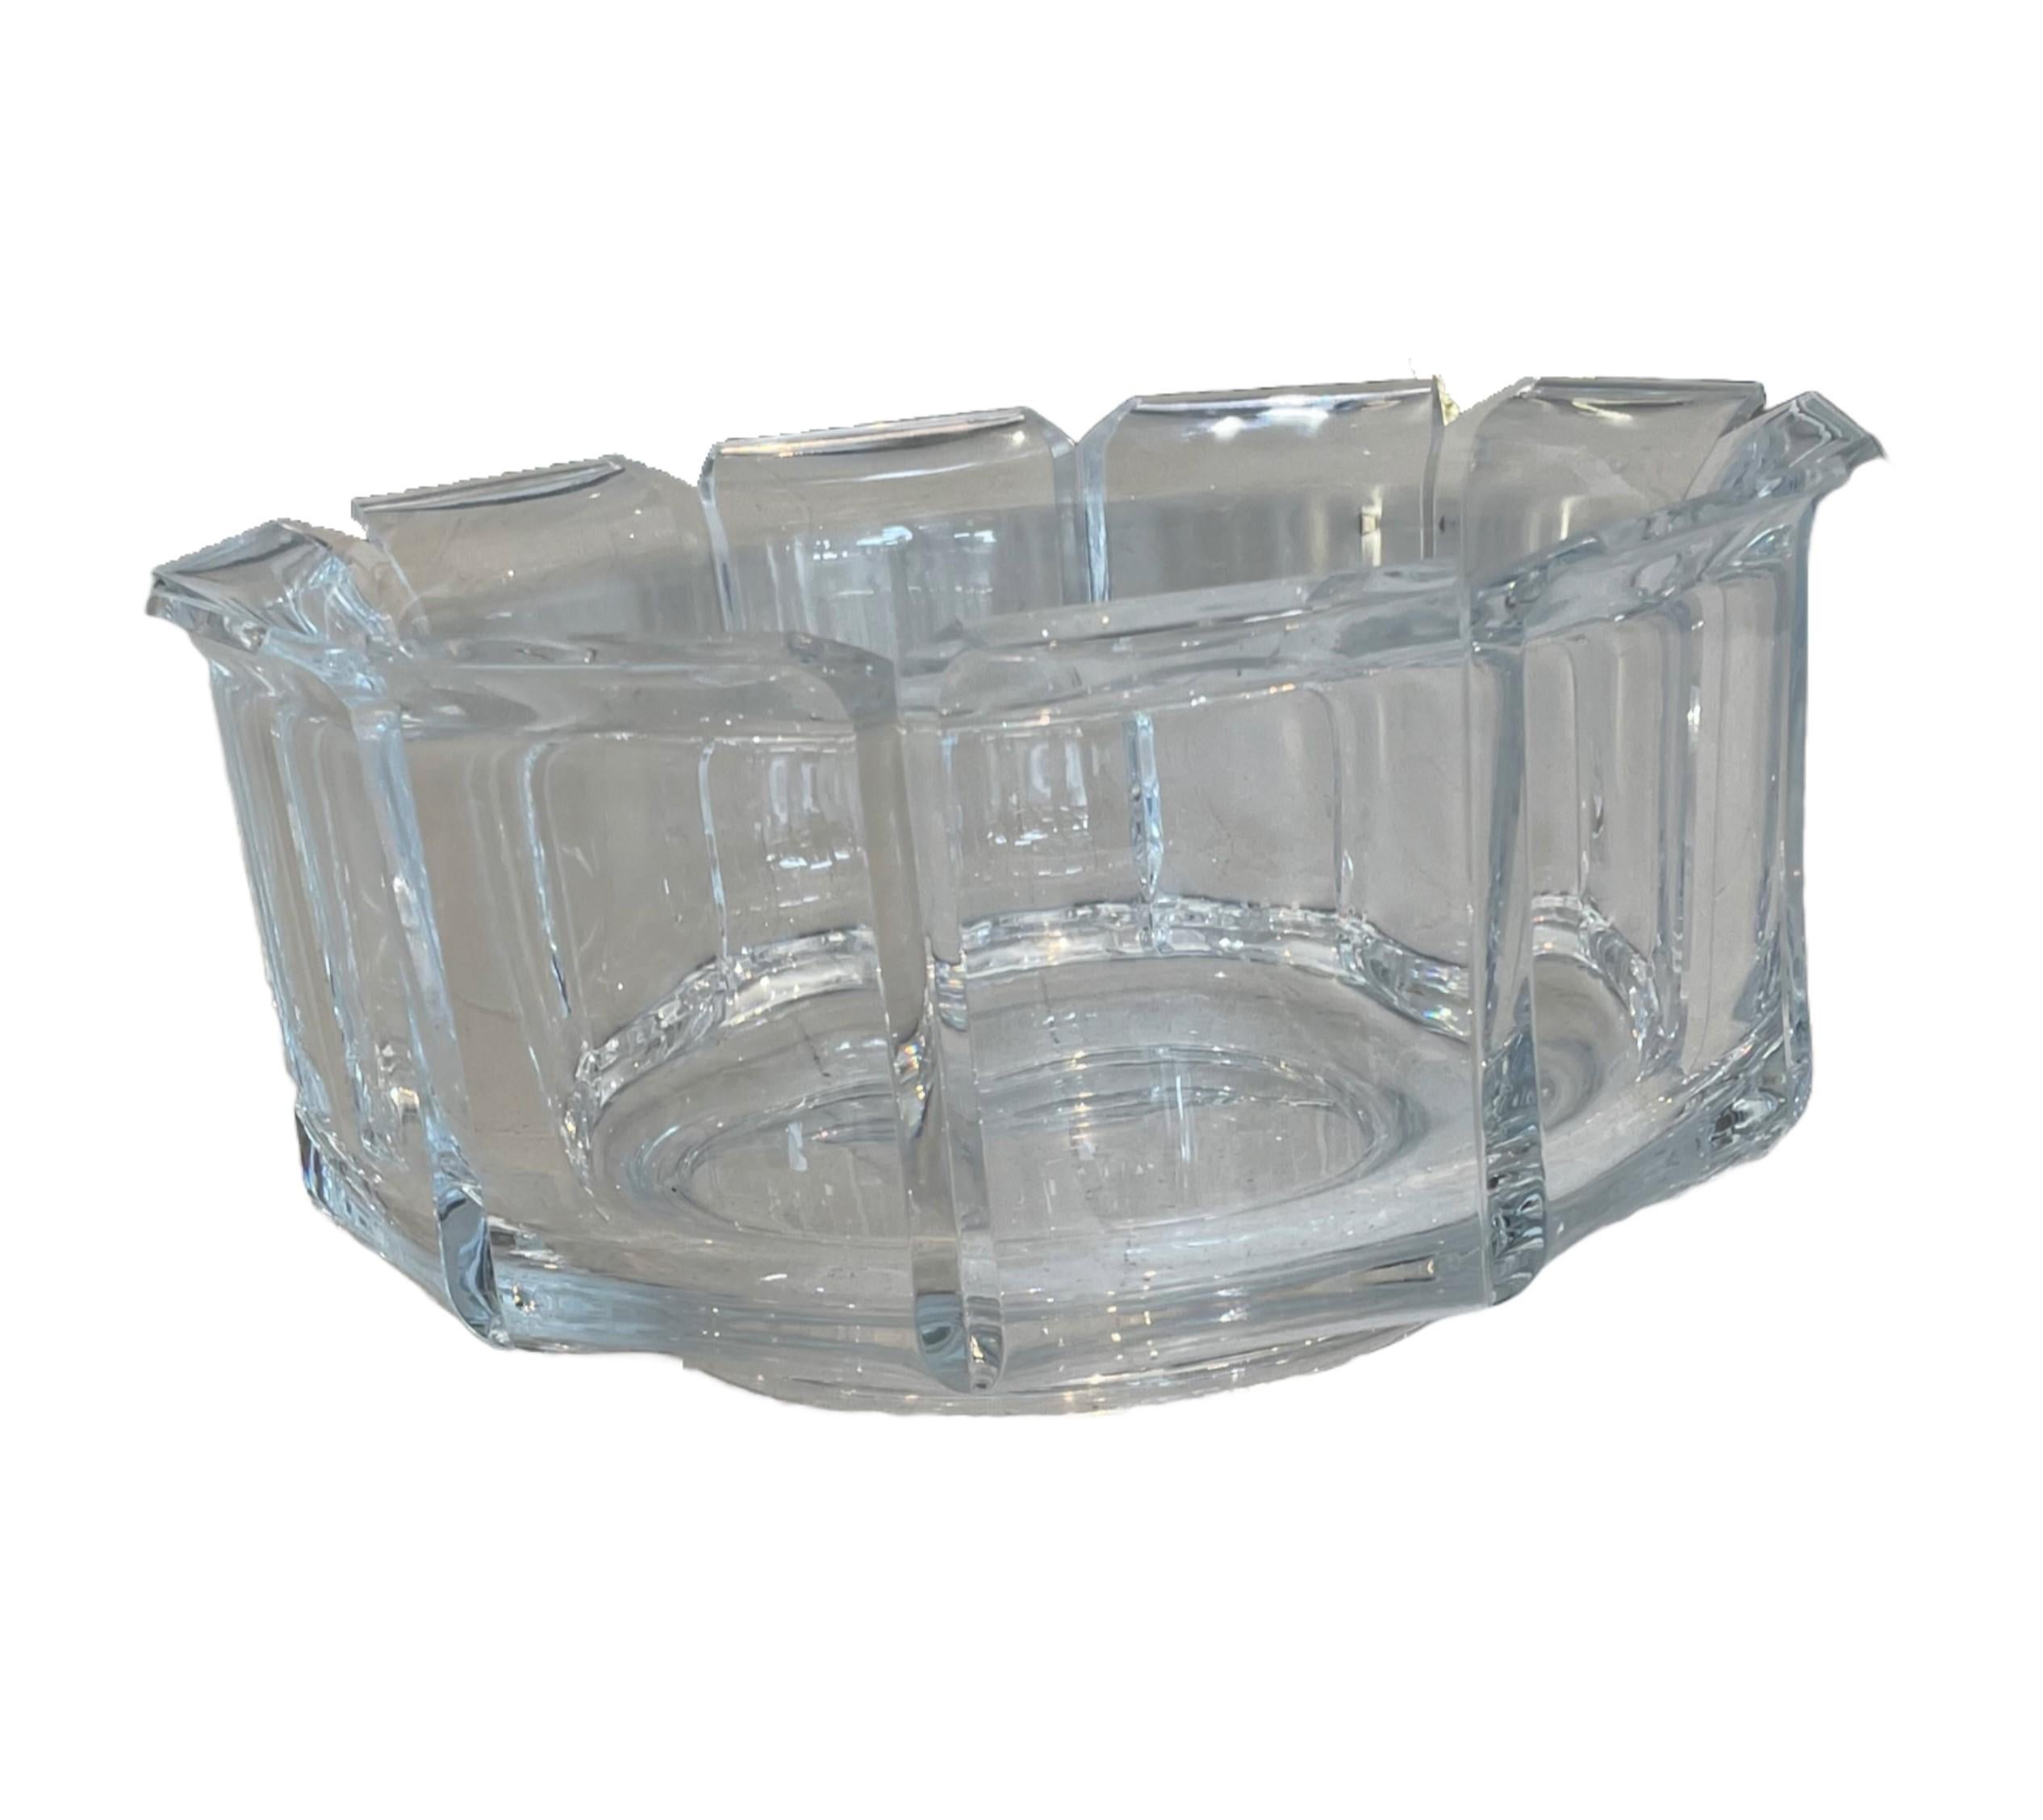 The 1970s grainware angular regal Lucite bowl, designed by American Designer William Bounds, is a unique and stylish piece of home decor that has gained popularity among collectors and design enthusiasts. Bounds founded his company, William Bounds,